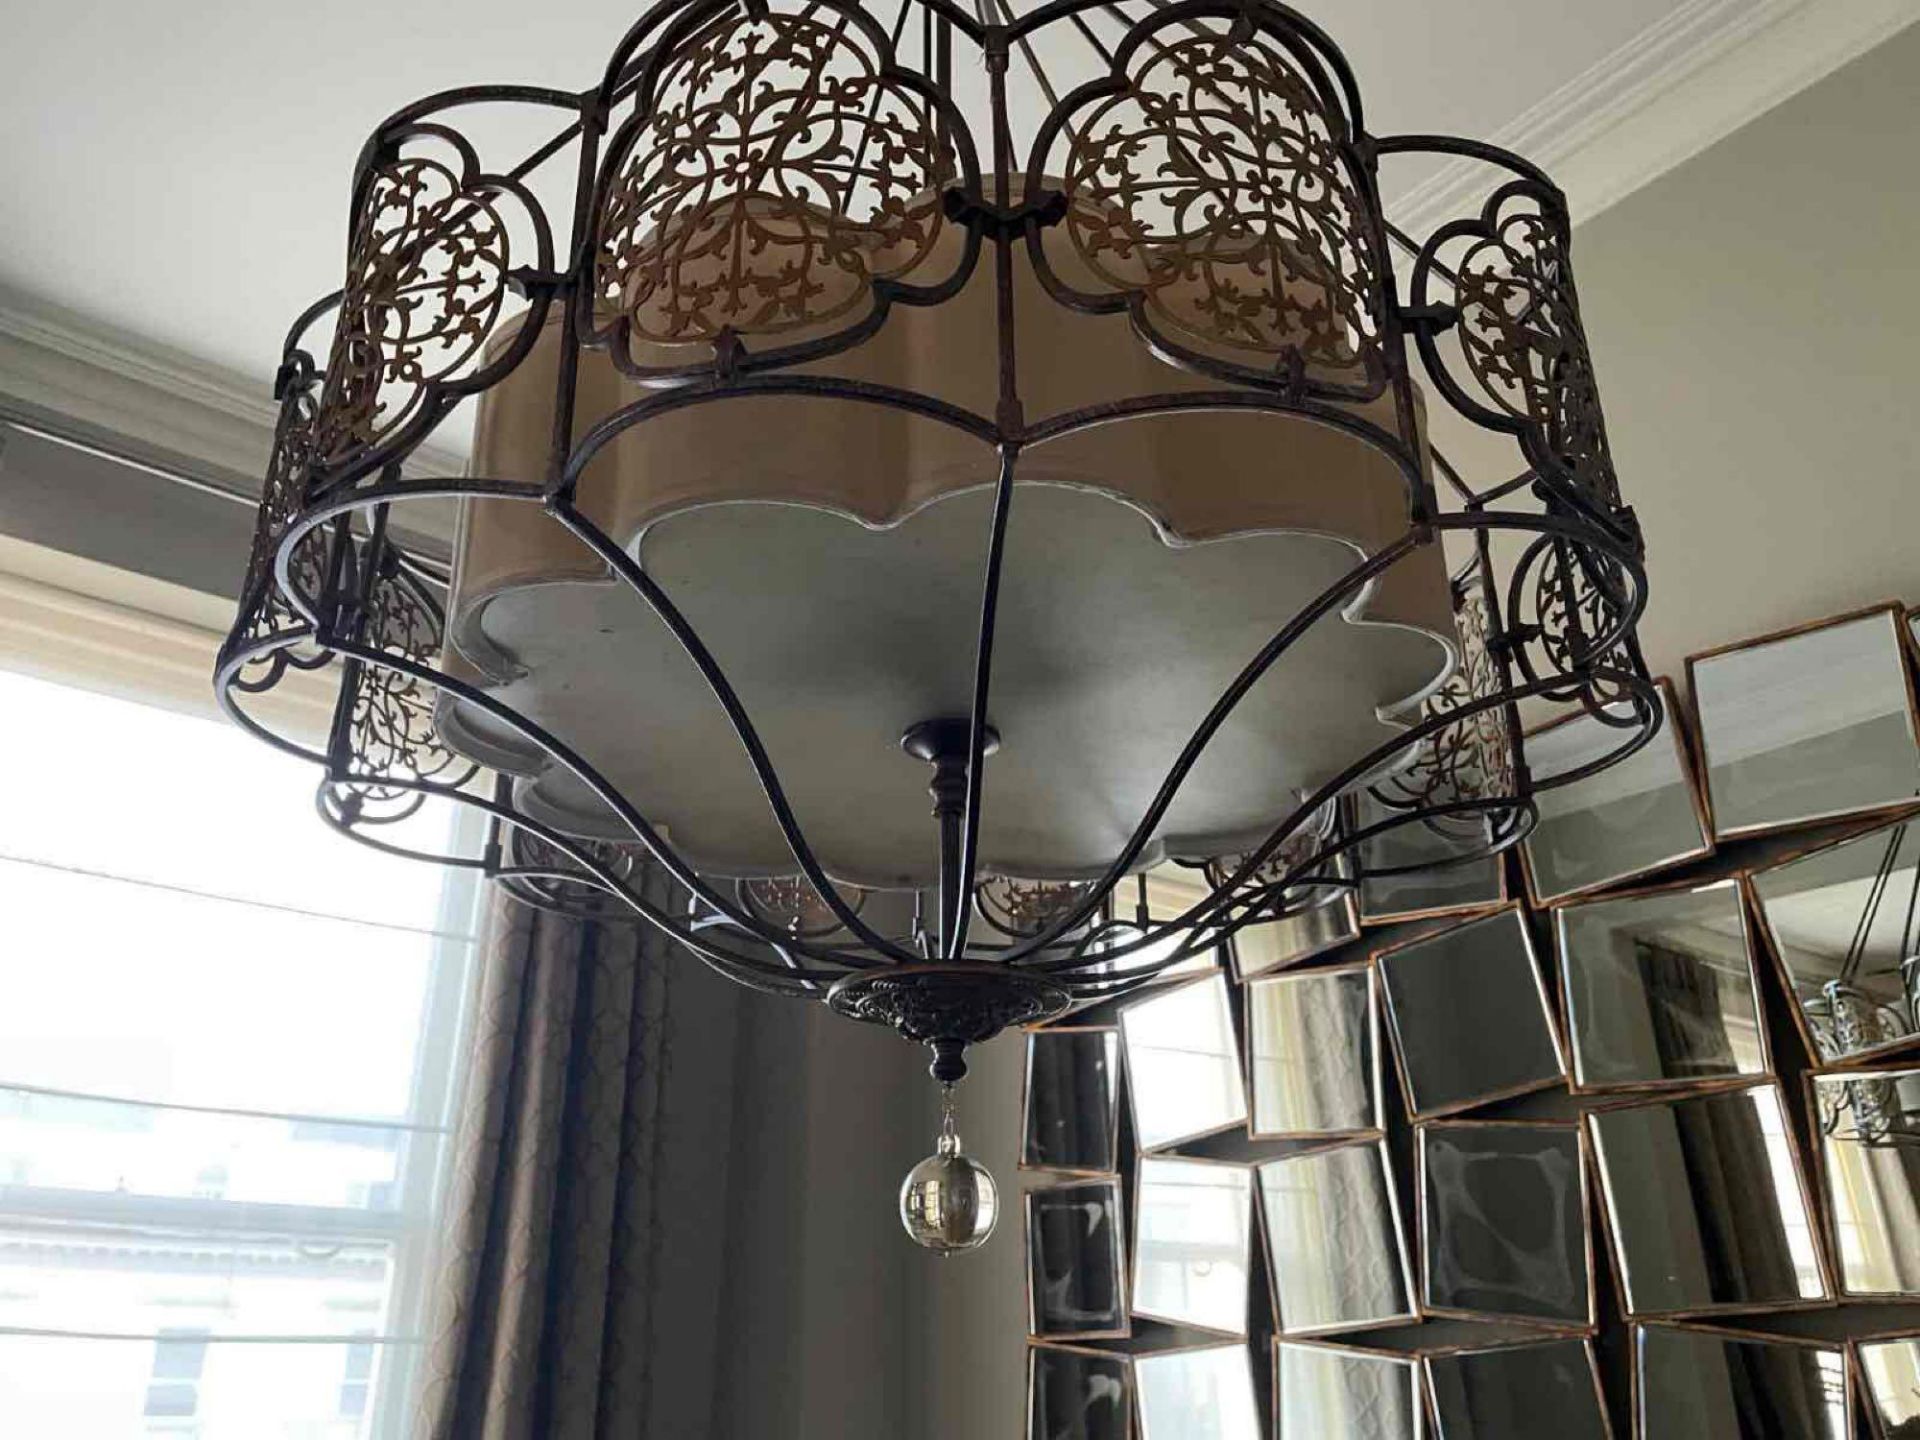 Feiss Marcella drum chandelier Featured in British bronze and oxidized bronze finishes with - Image 3 of 6